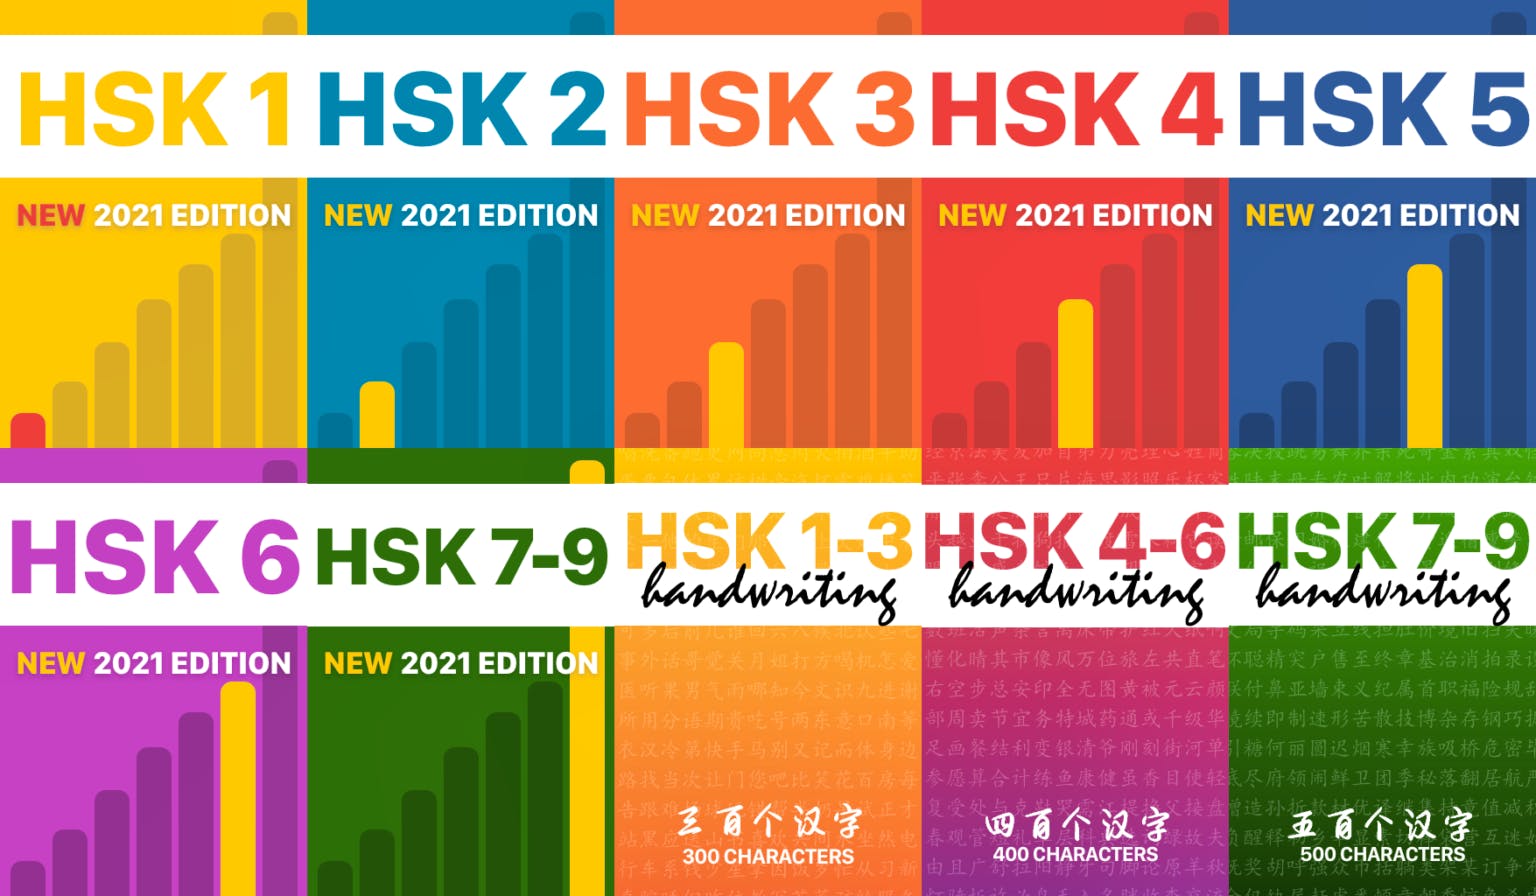 How long does it take to pass the HSK?